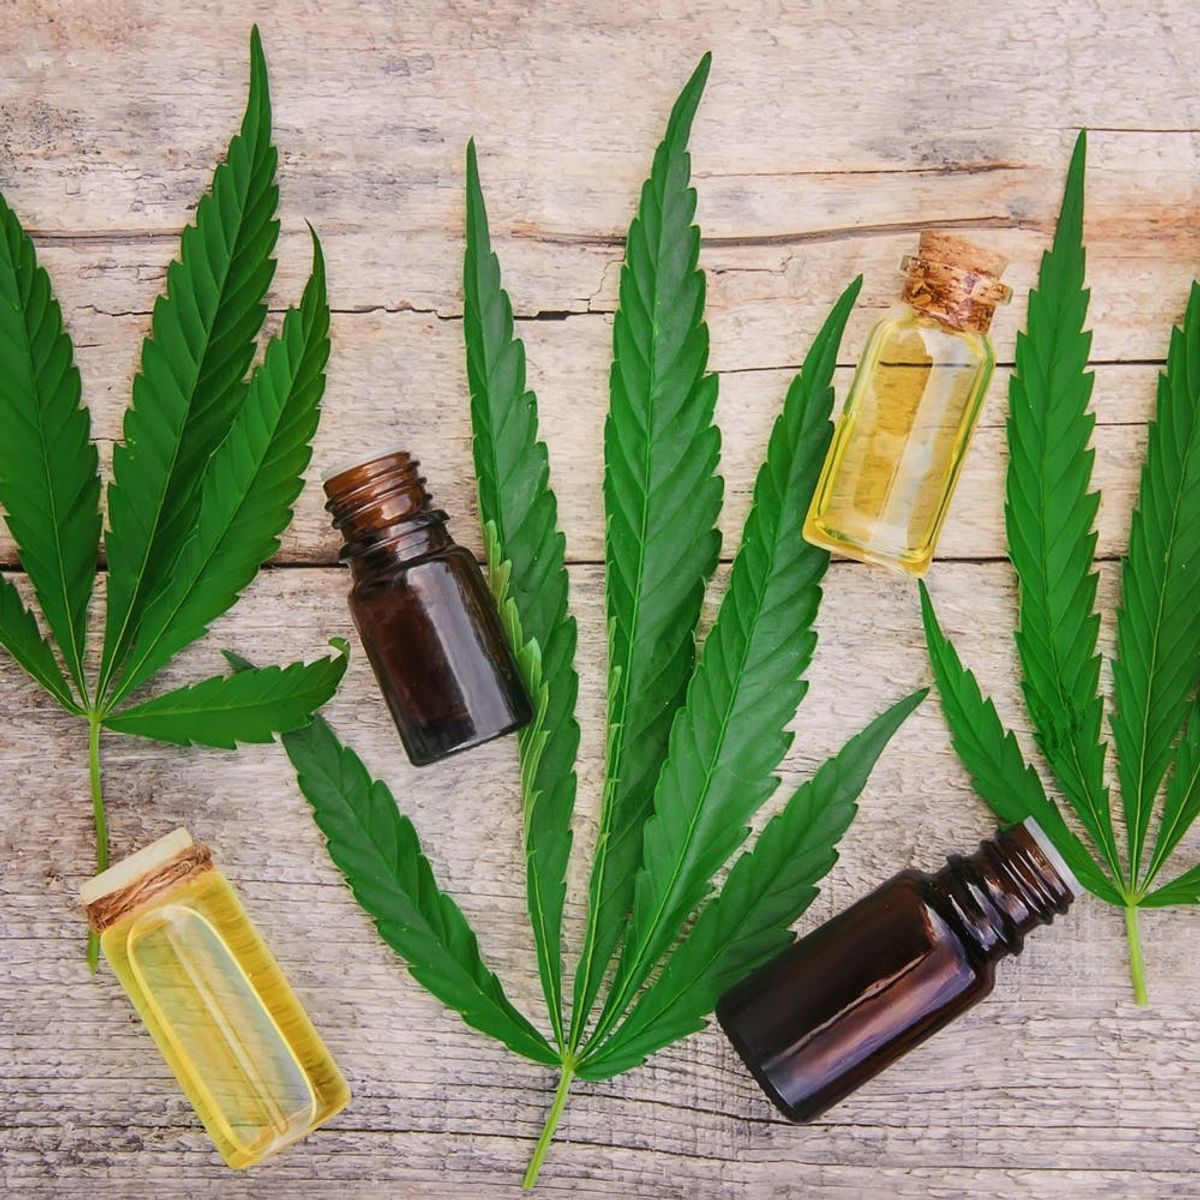 Everything You Need to Know About CBD, the Latest “It” Wellness Ingredient